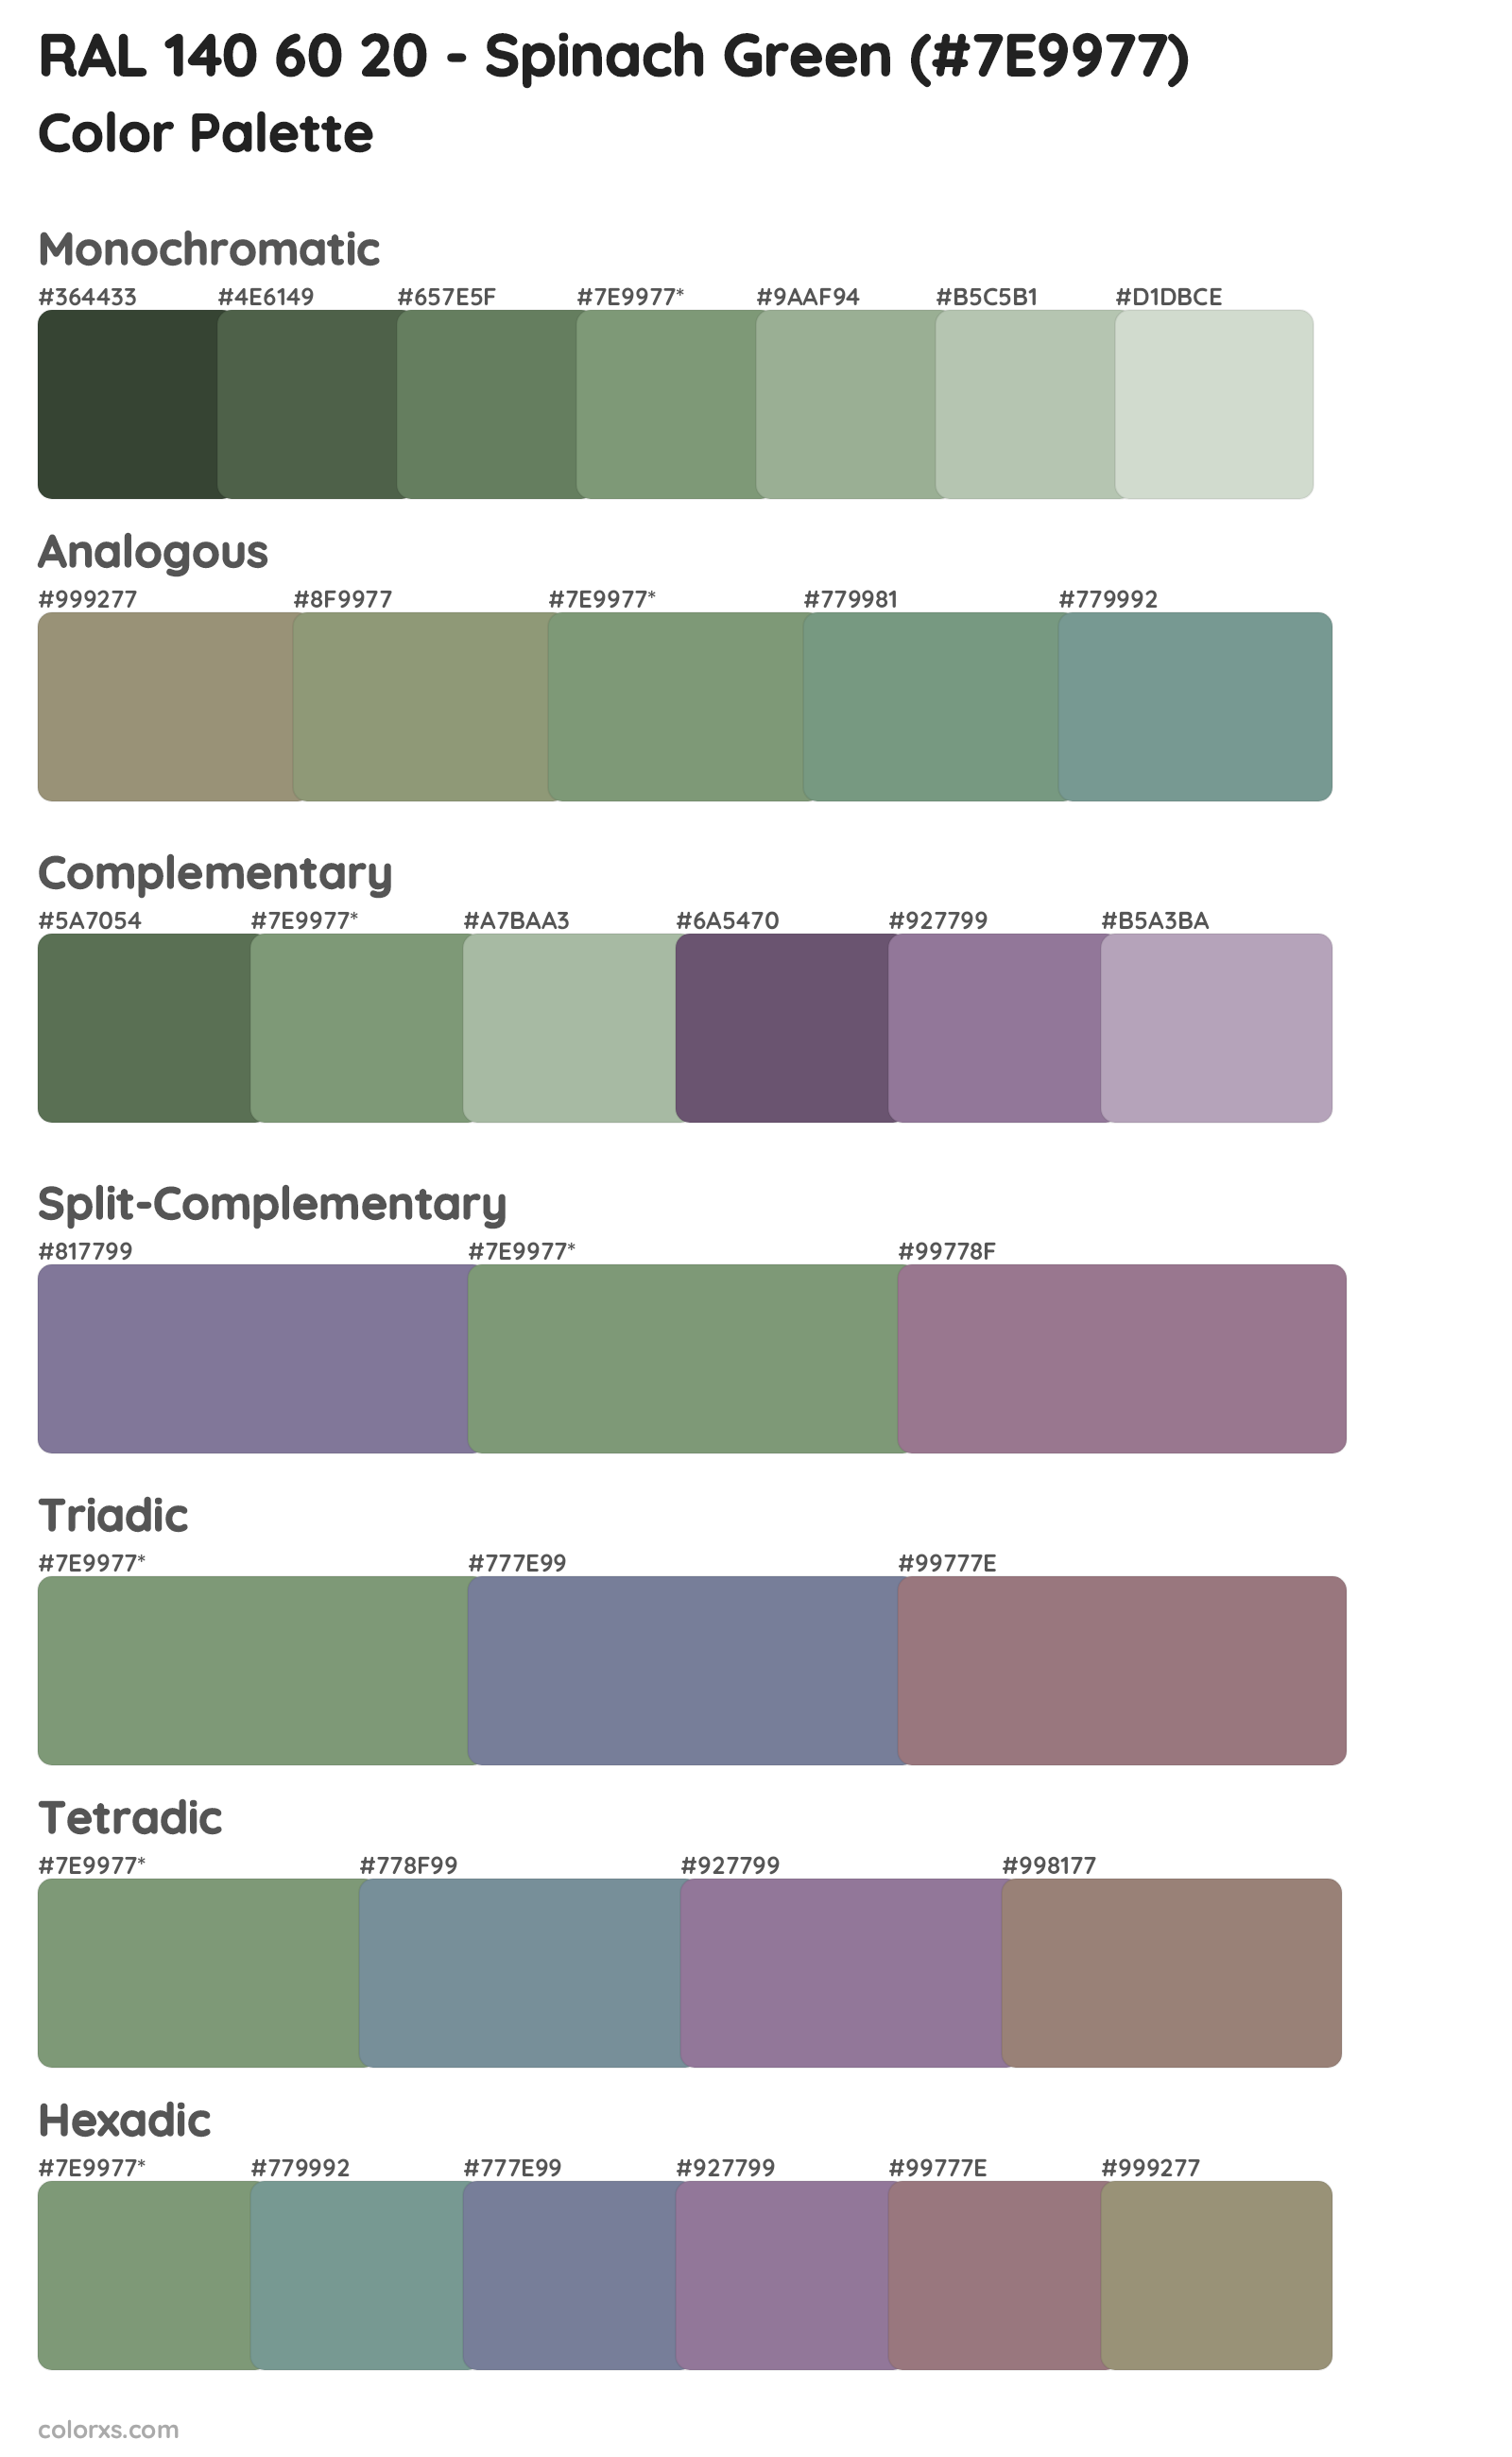 RAL 140 60 20 - Spinach Green Color Scheme Palettes